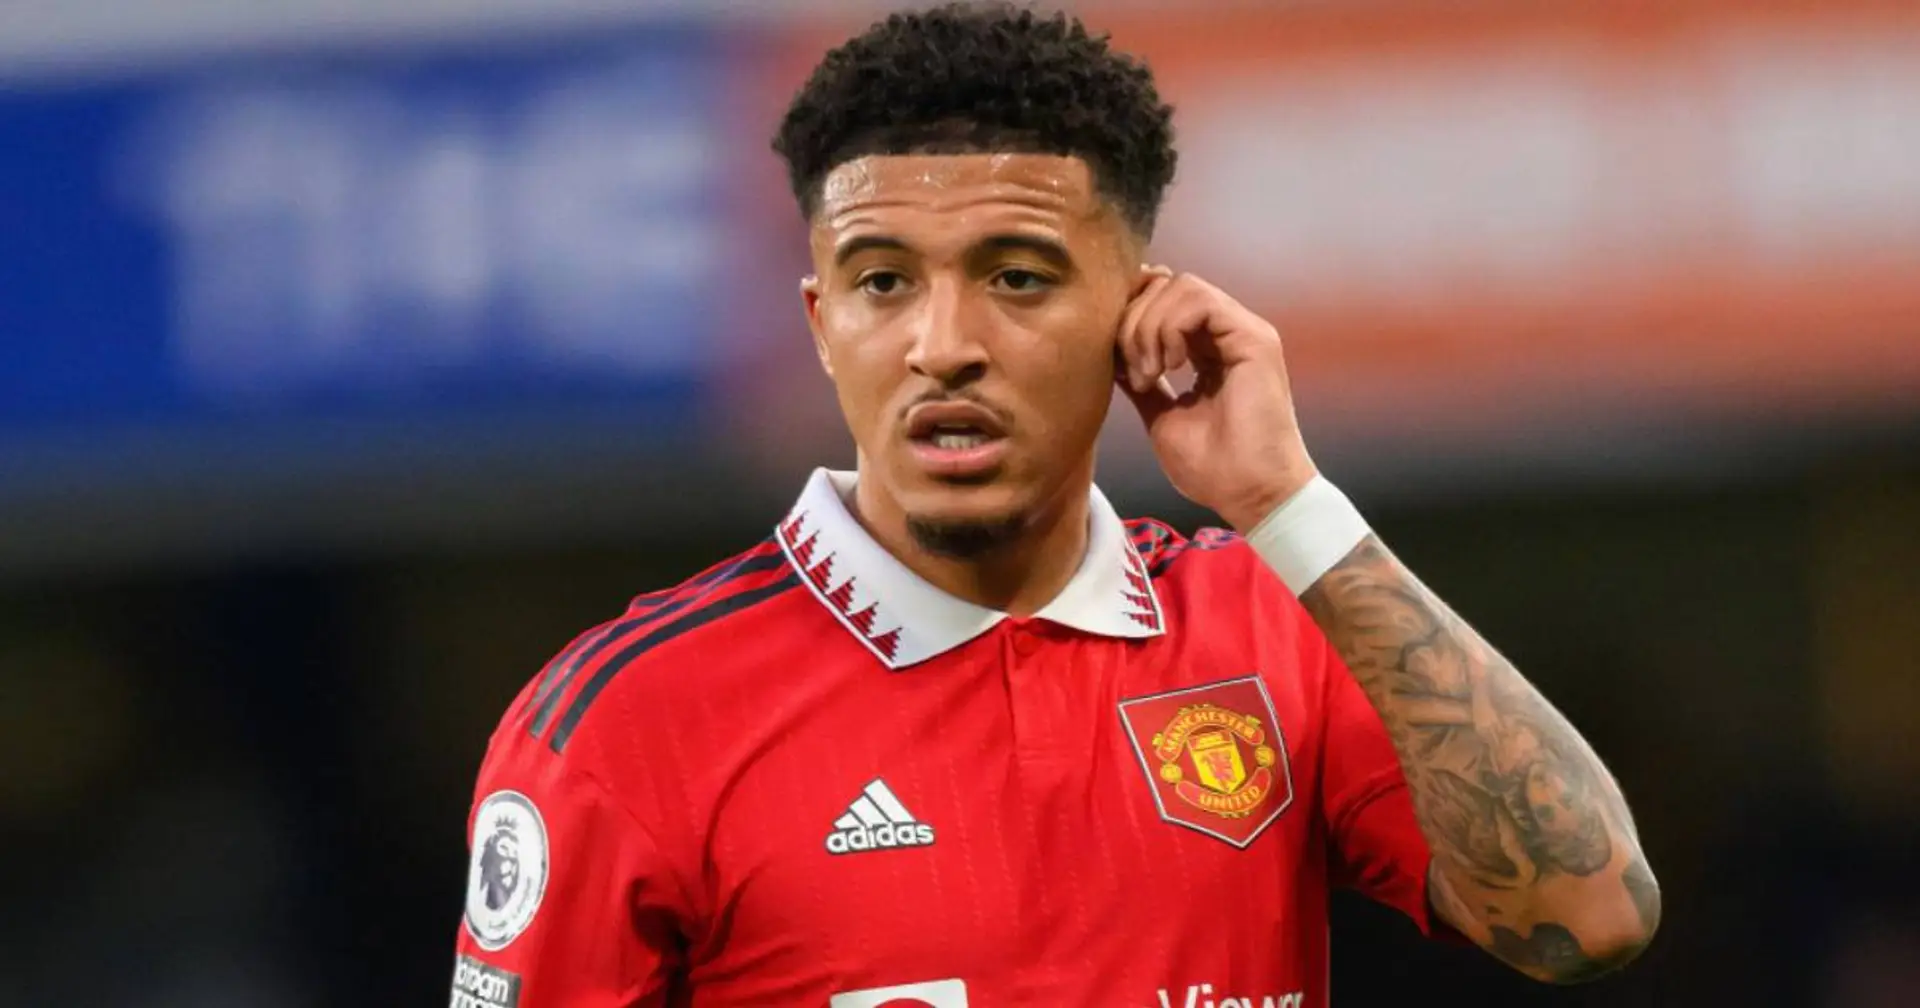 Sancho told he'll never play for United again and 3 more under-radar stories today